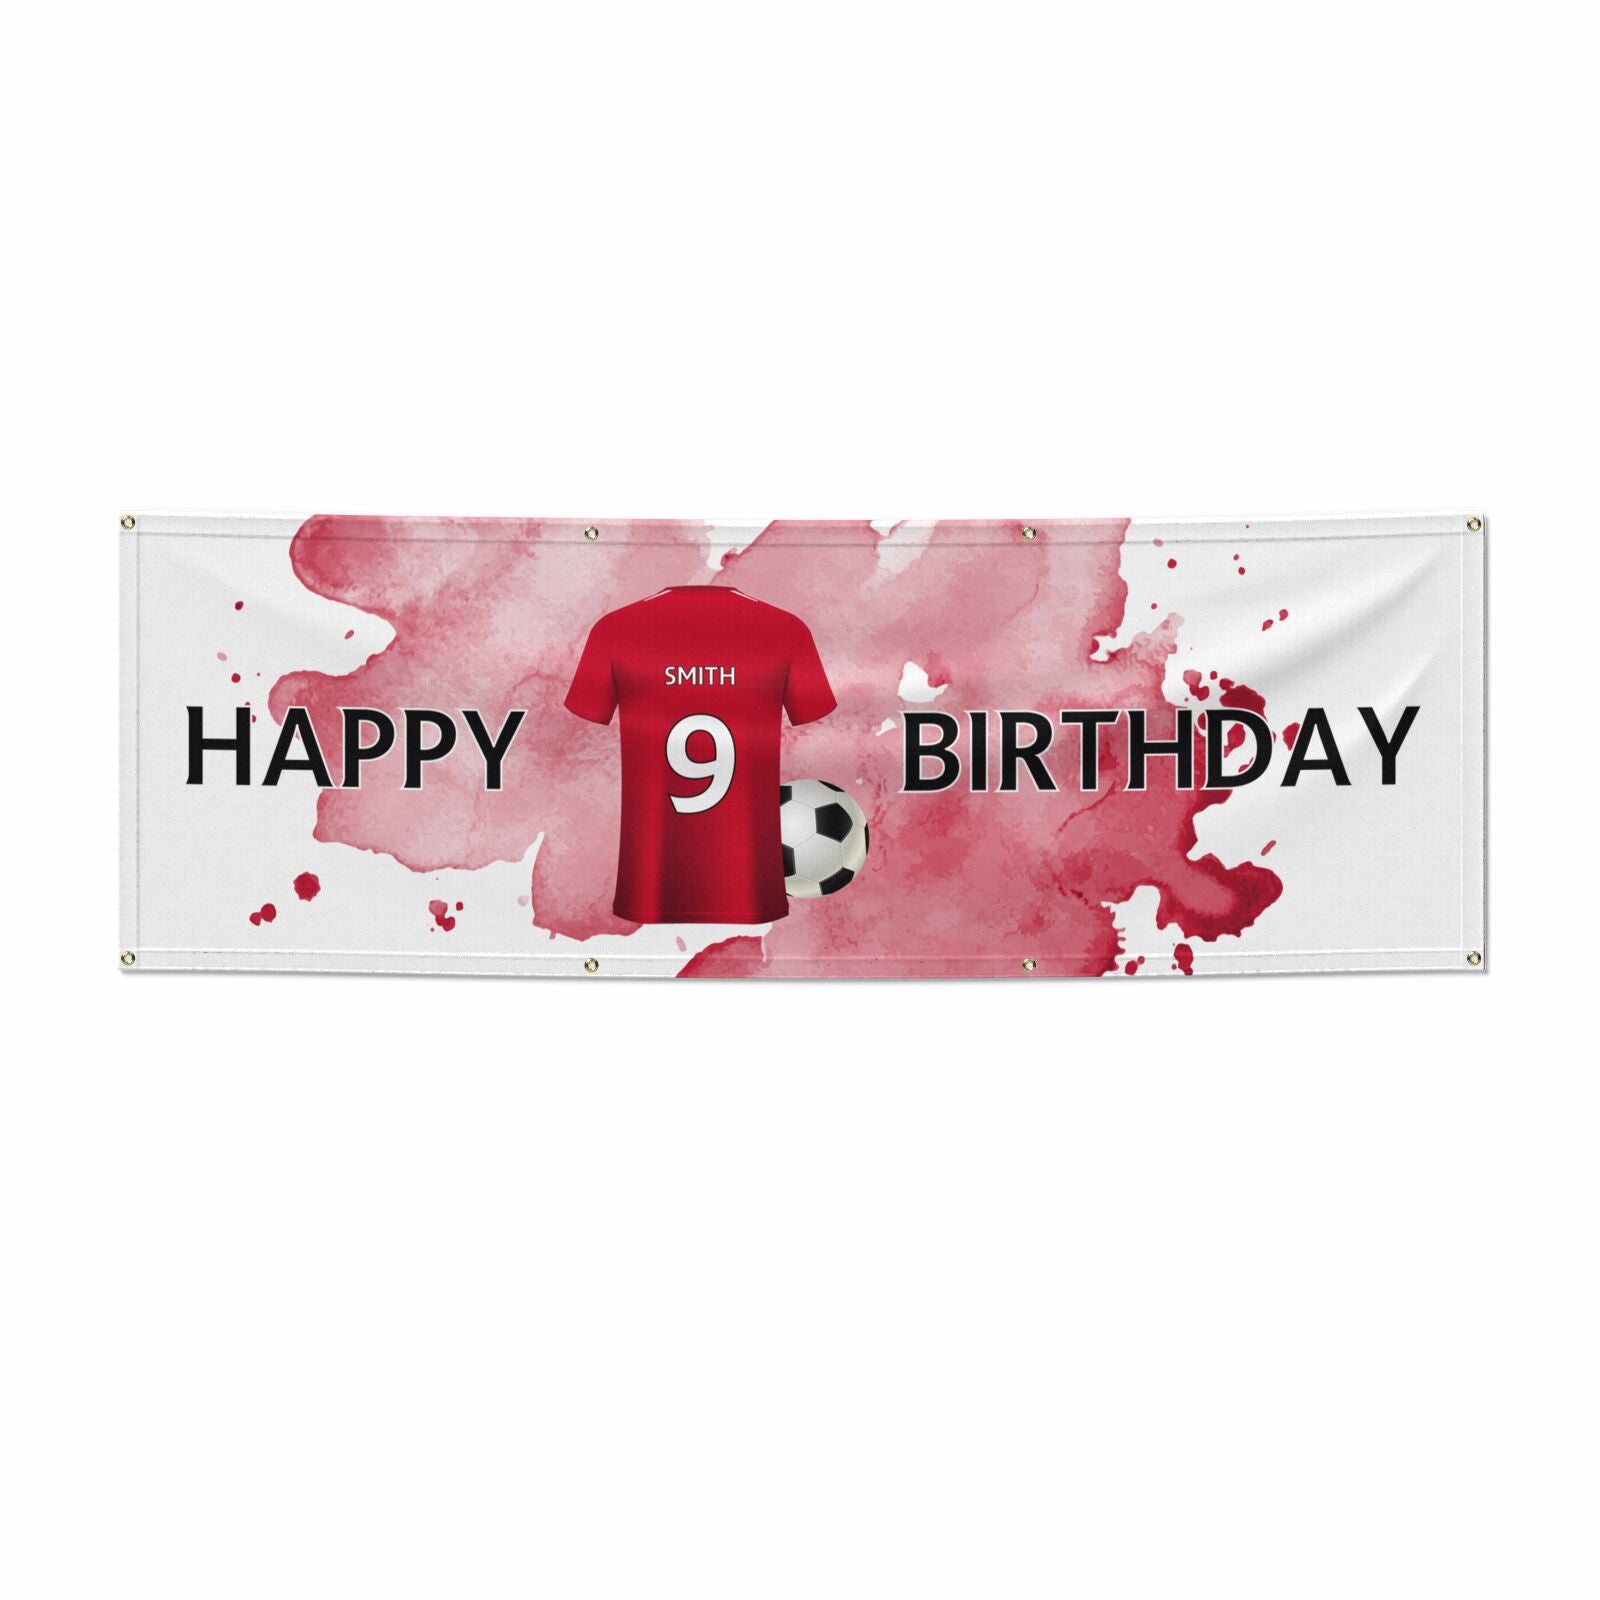 Red Football Shirt Personalised 6x2 Vinly Banner with Grommets